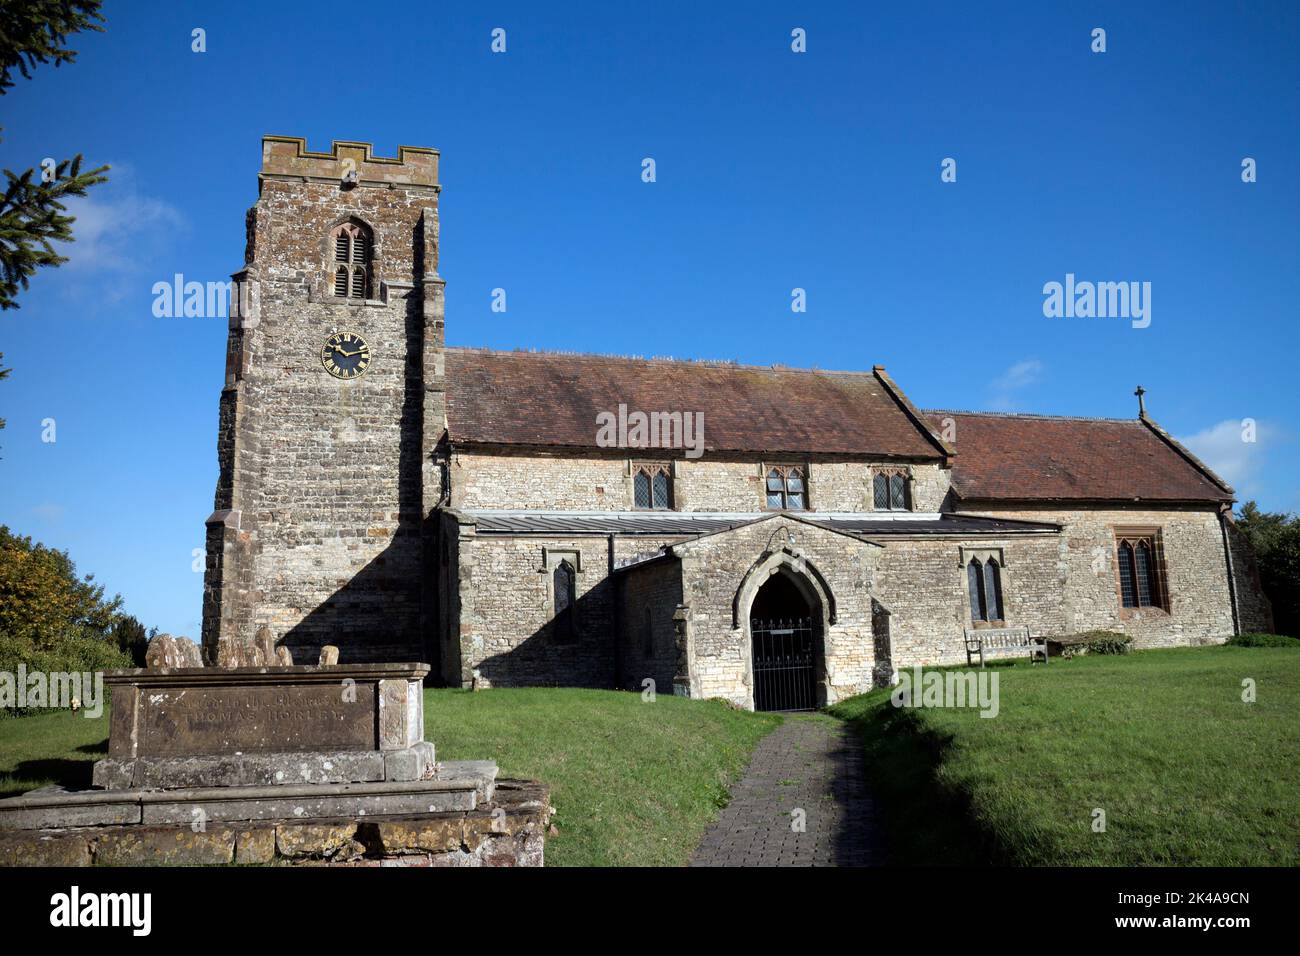 St. Michael and All Angels Church, Warwickshire, England, UK Stock Photo